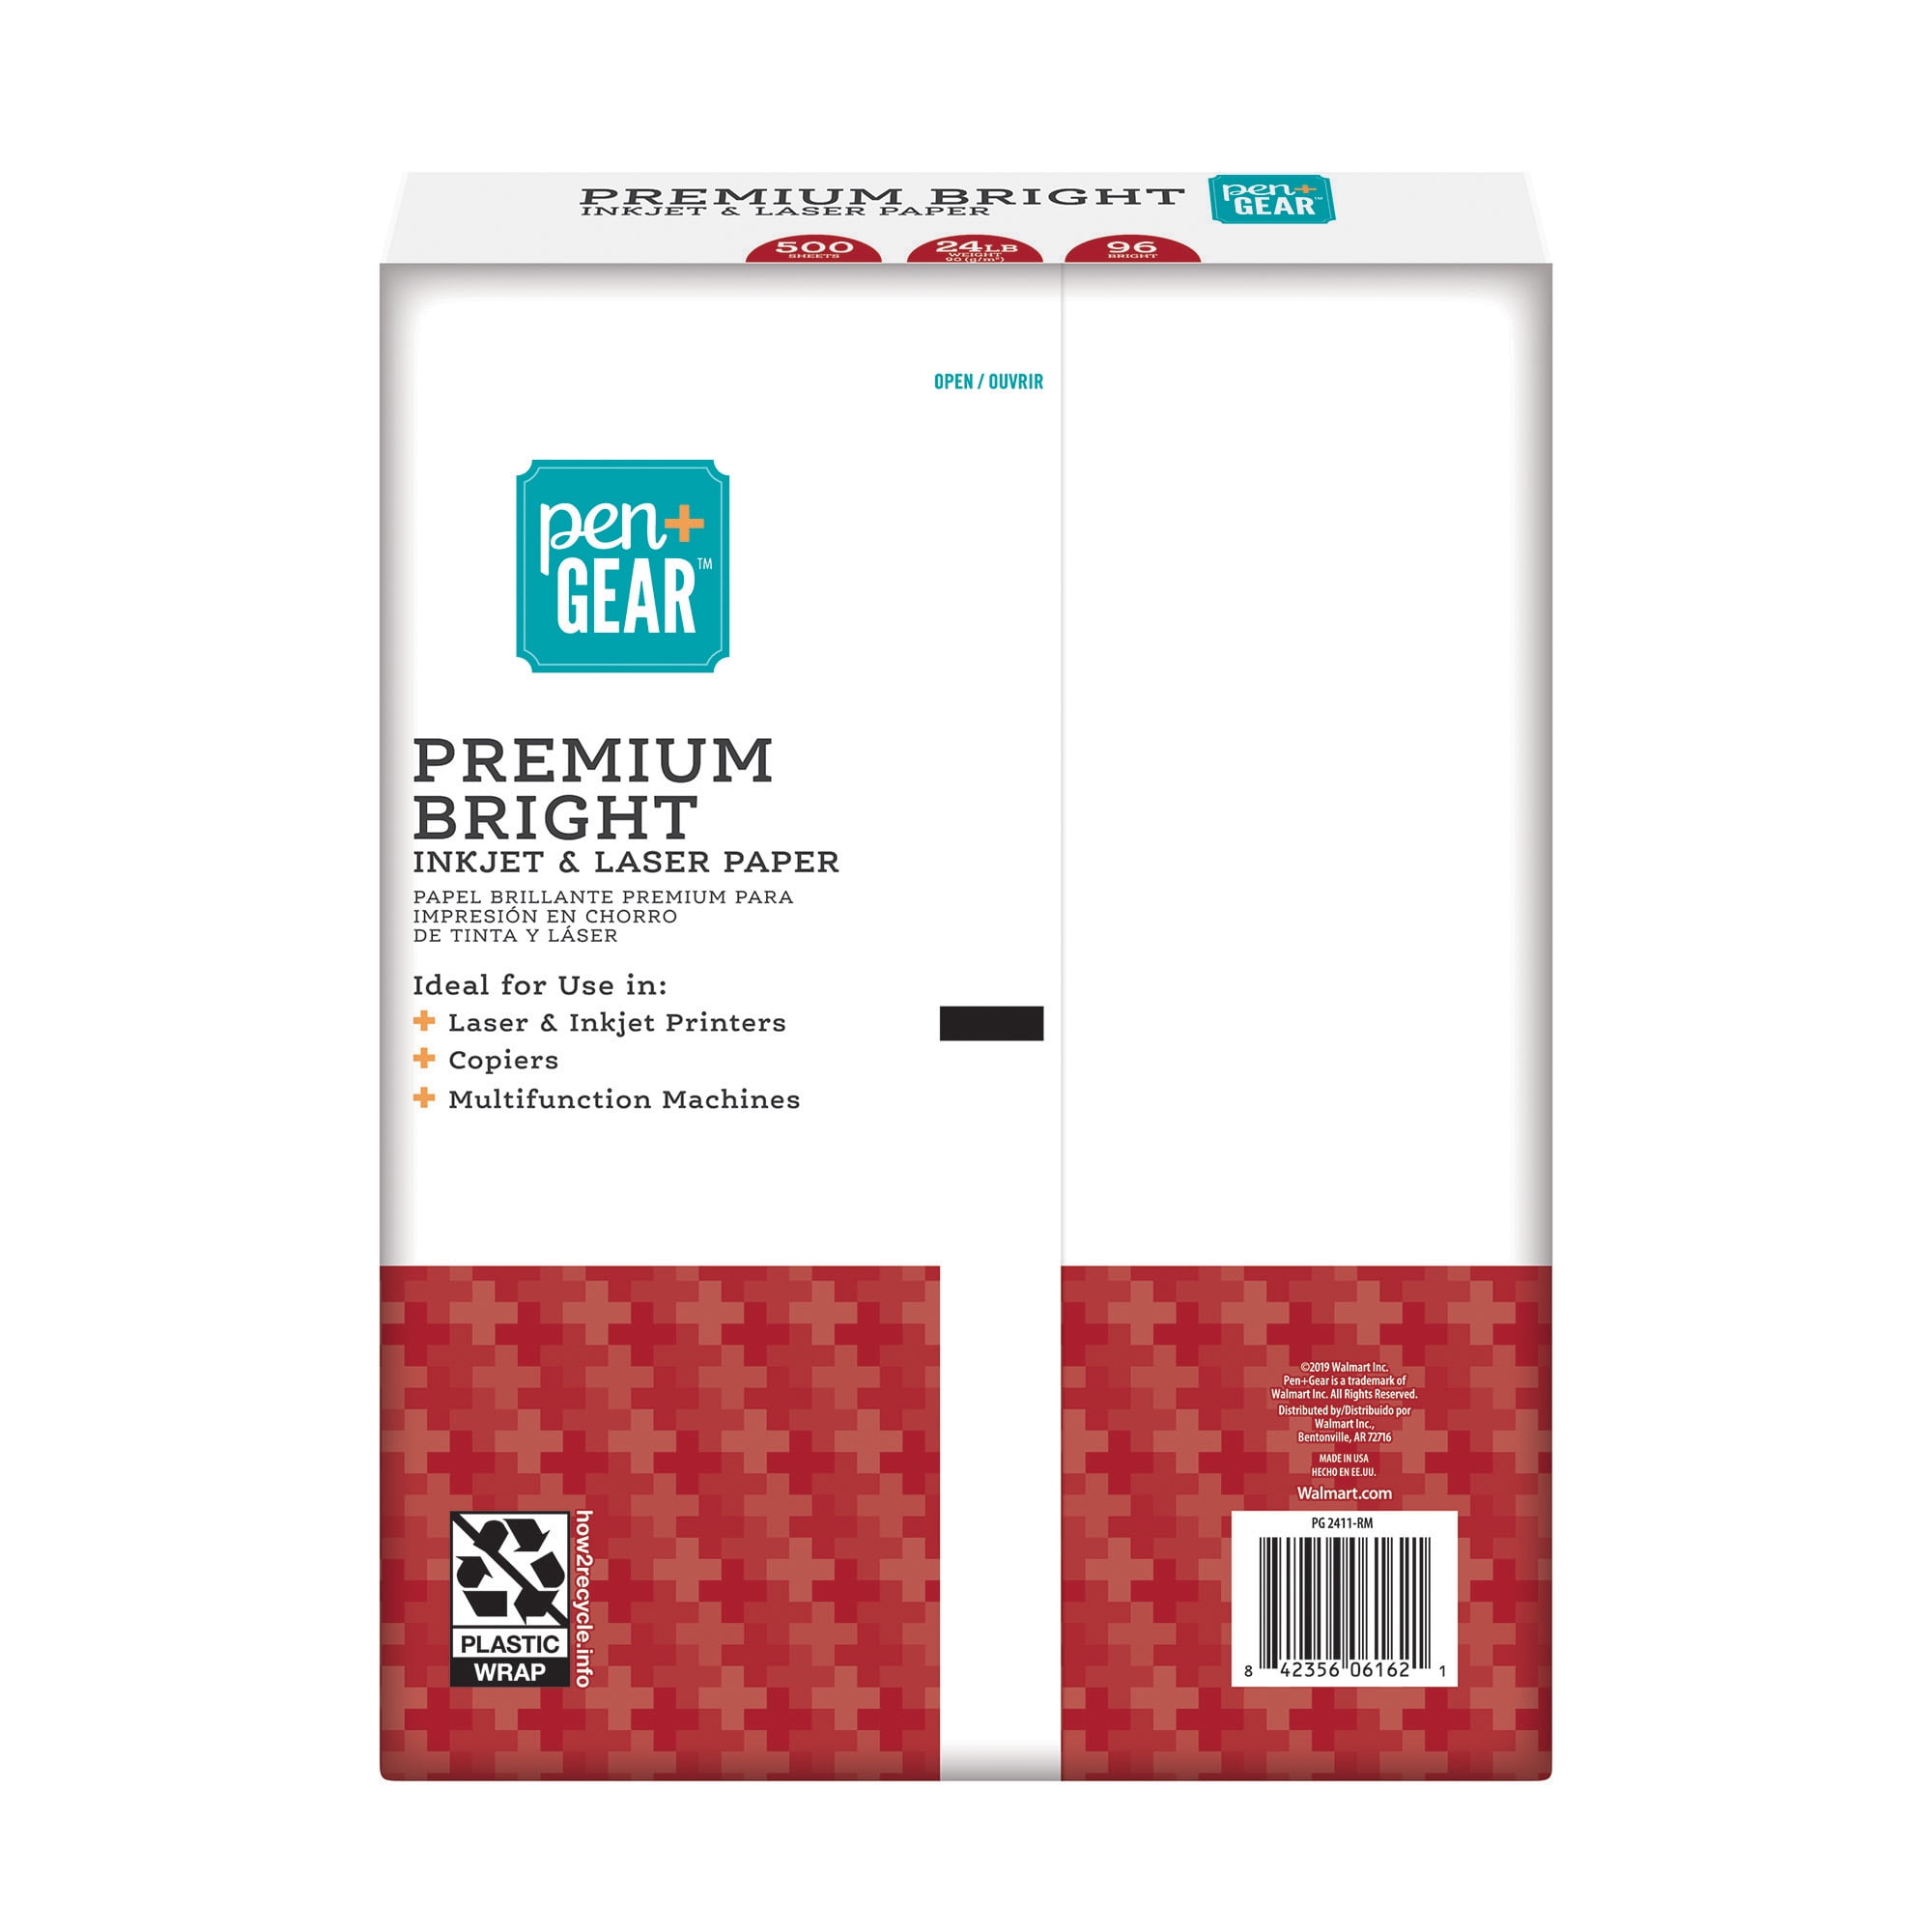 RS PRO, RS PRO White Printer Paper Roll, 524-492